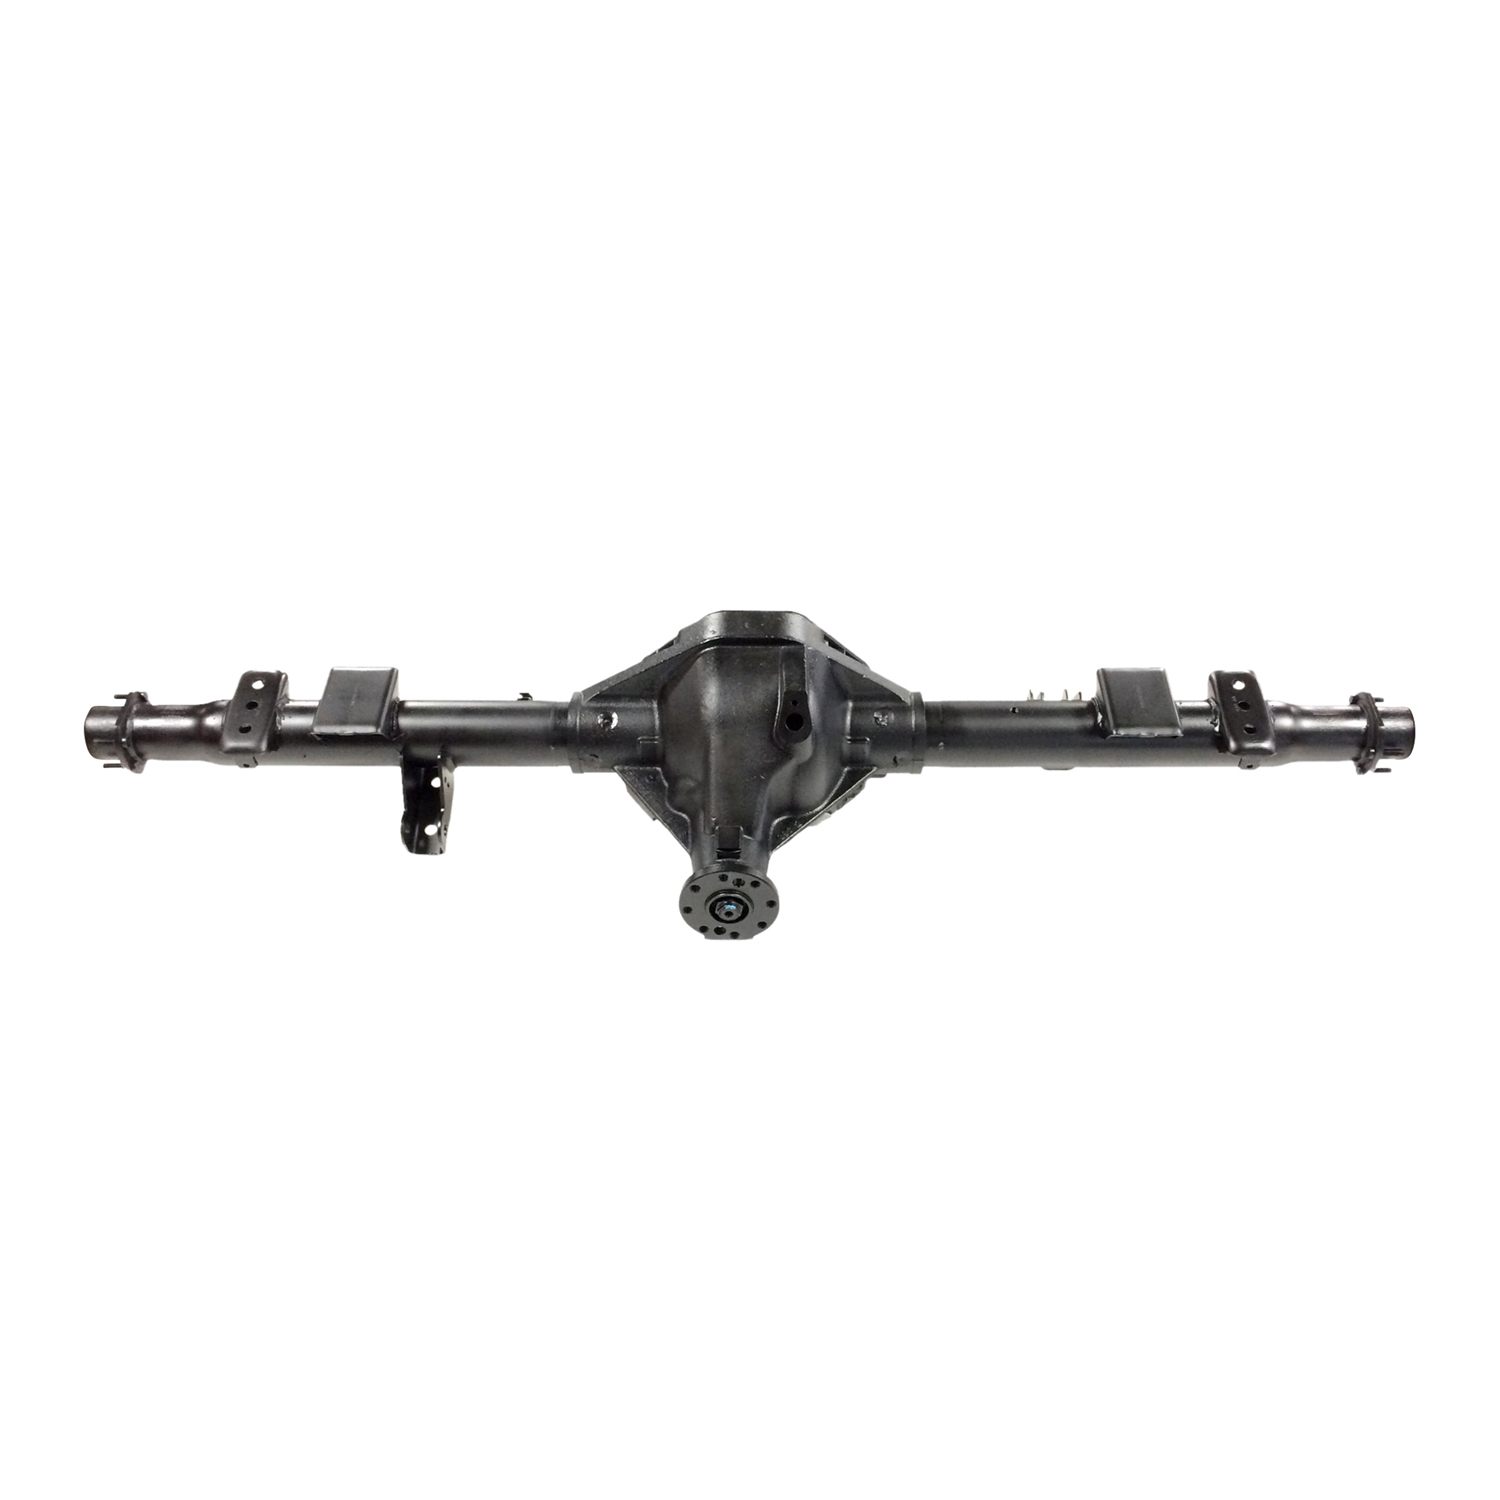 Remanufactured Complete Axle Assembly for Chy 9.25" 2005 D1500 3.21 , Posi LSD